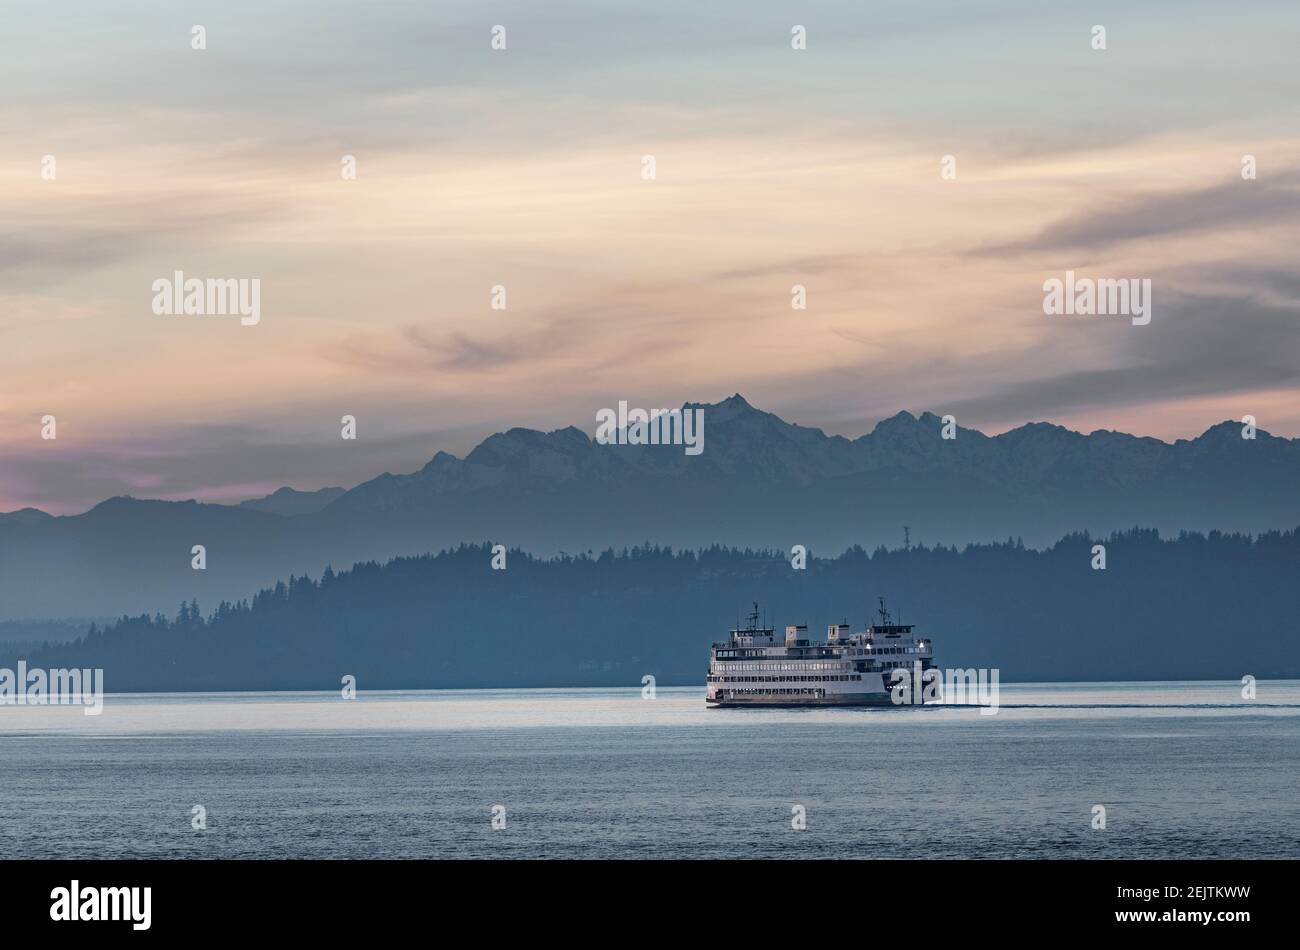 WA20098-00.....WASHINGTON - The Edmonds Kingston Ferry crossing the Puget Sound. Viewed from the Edmonds waterfront. Stock Photo